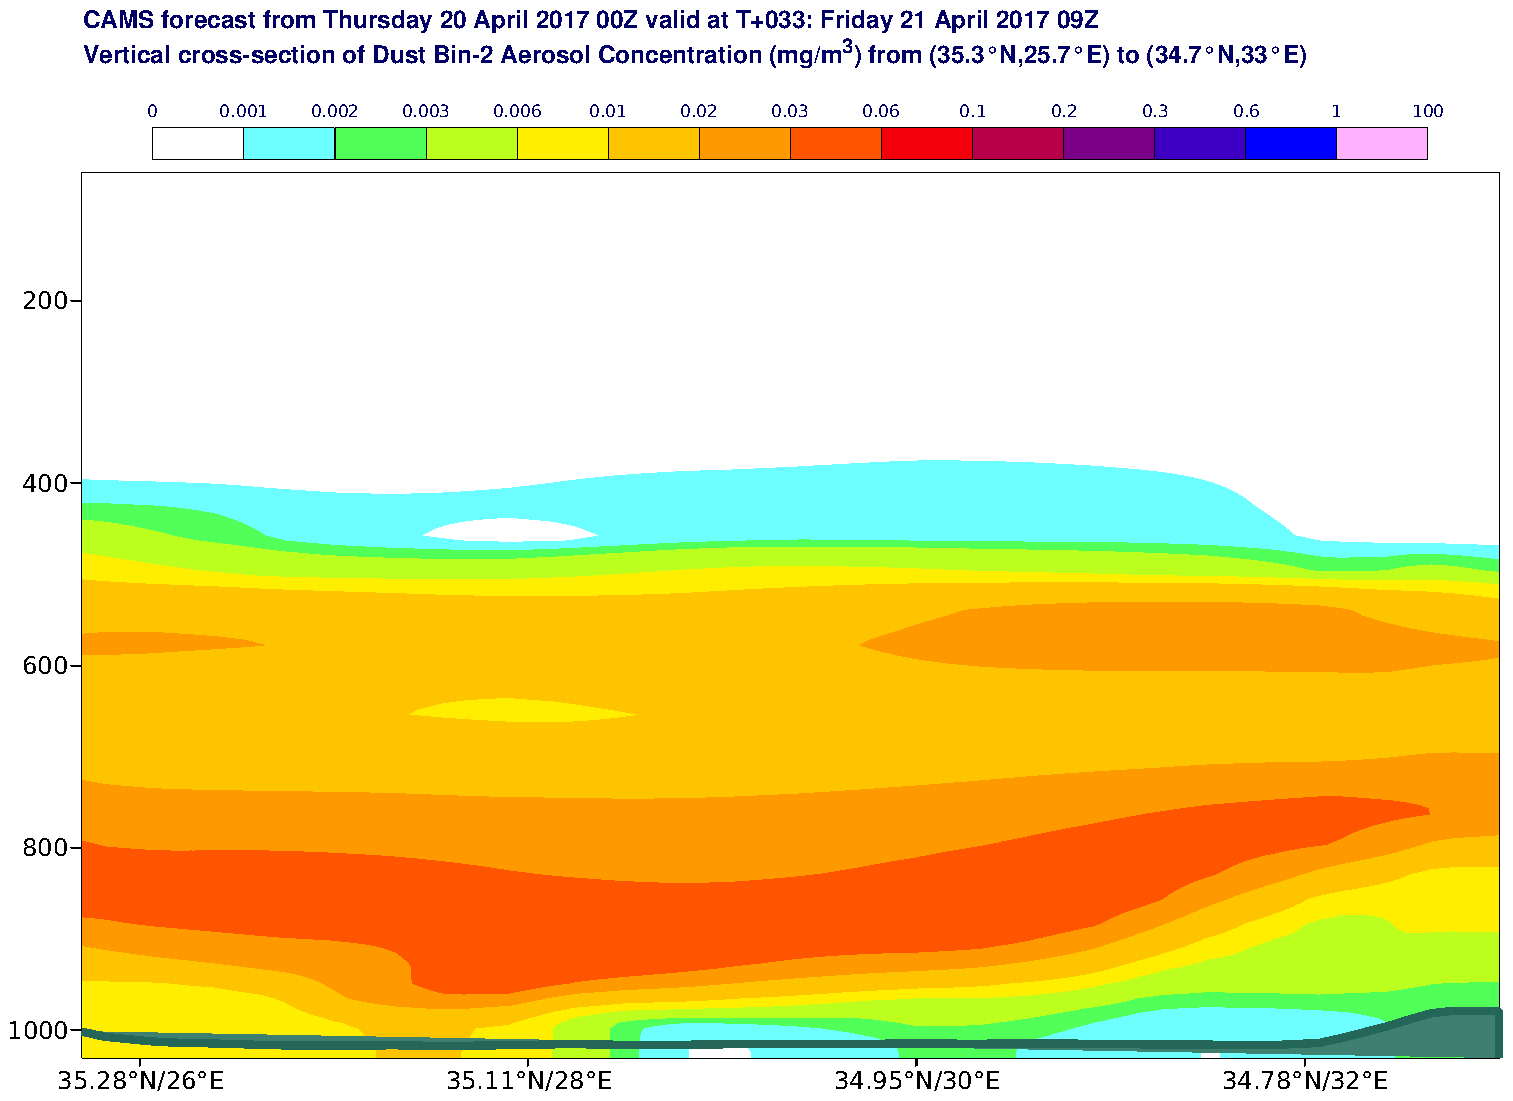 Vertical cross-section of Dust Bin-2 Aerosol Concentration (mg/m3) valid at T33 - 2017-04-21 09:00